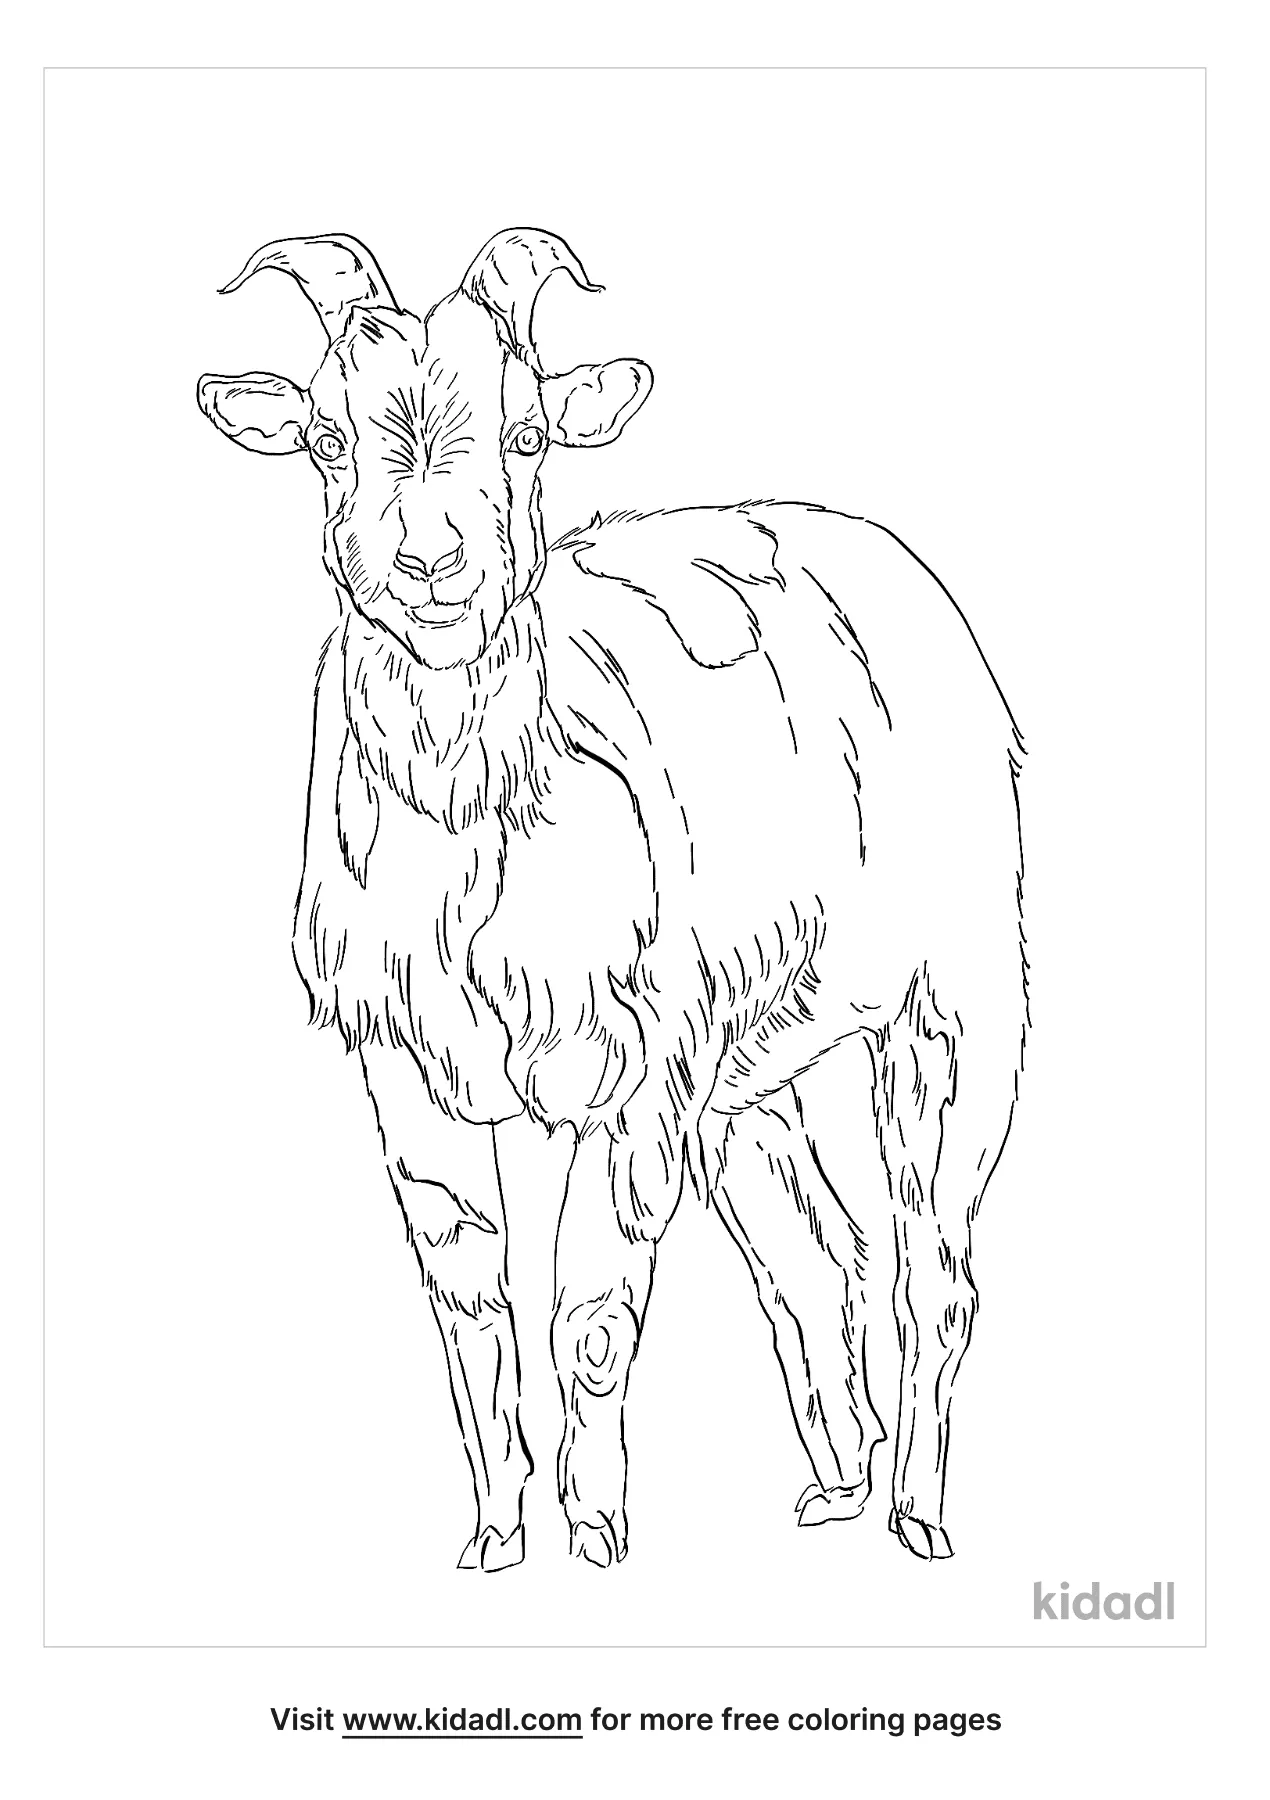 Fainting Goat Coloring Page